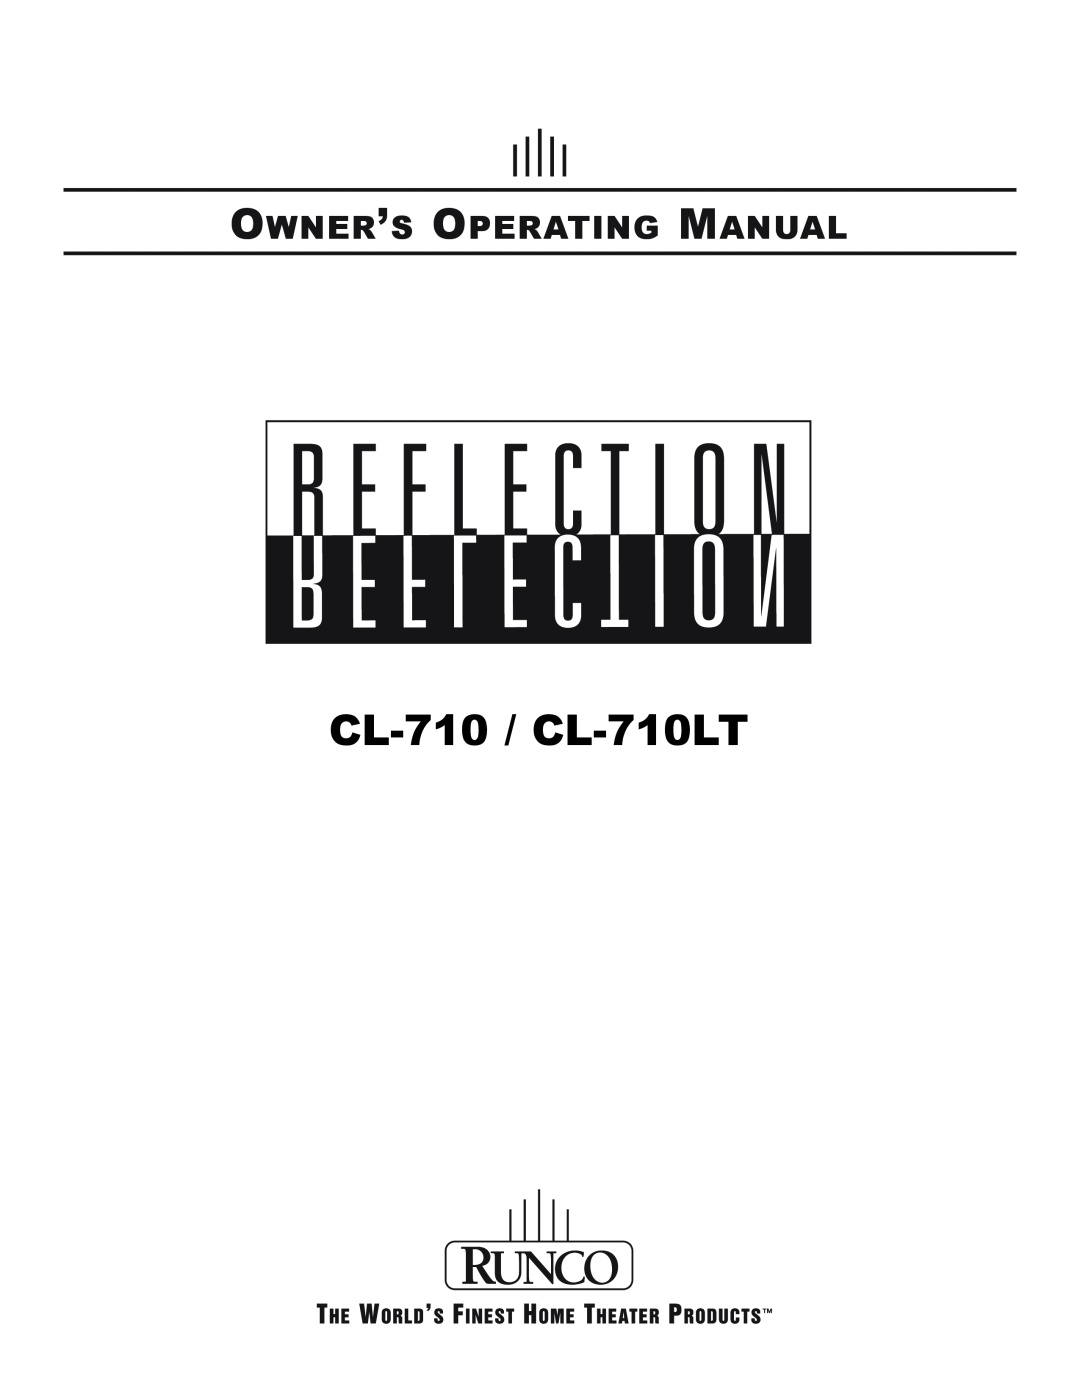 Runco Reflection manual CL-710 / CL-710LT, Owner’S Operating Manual 